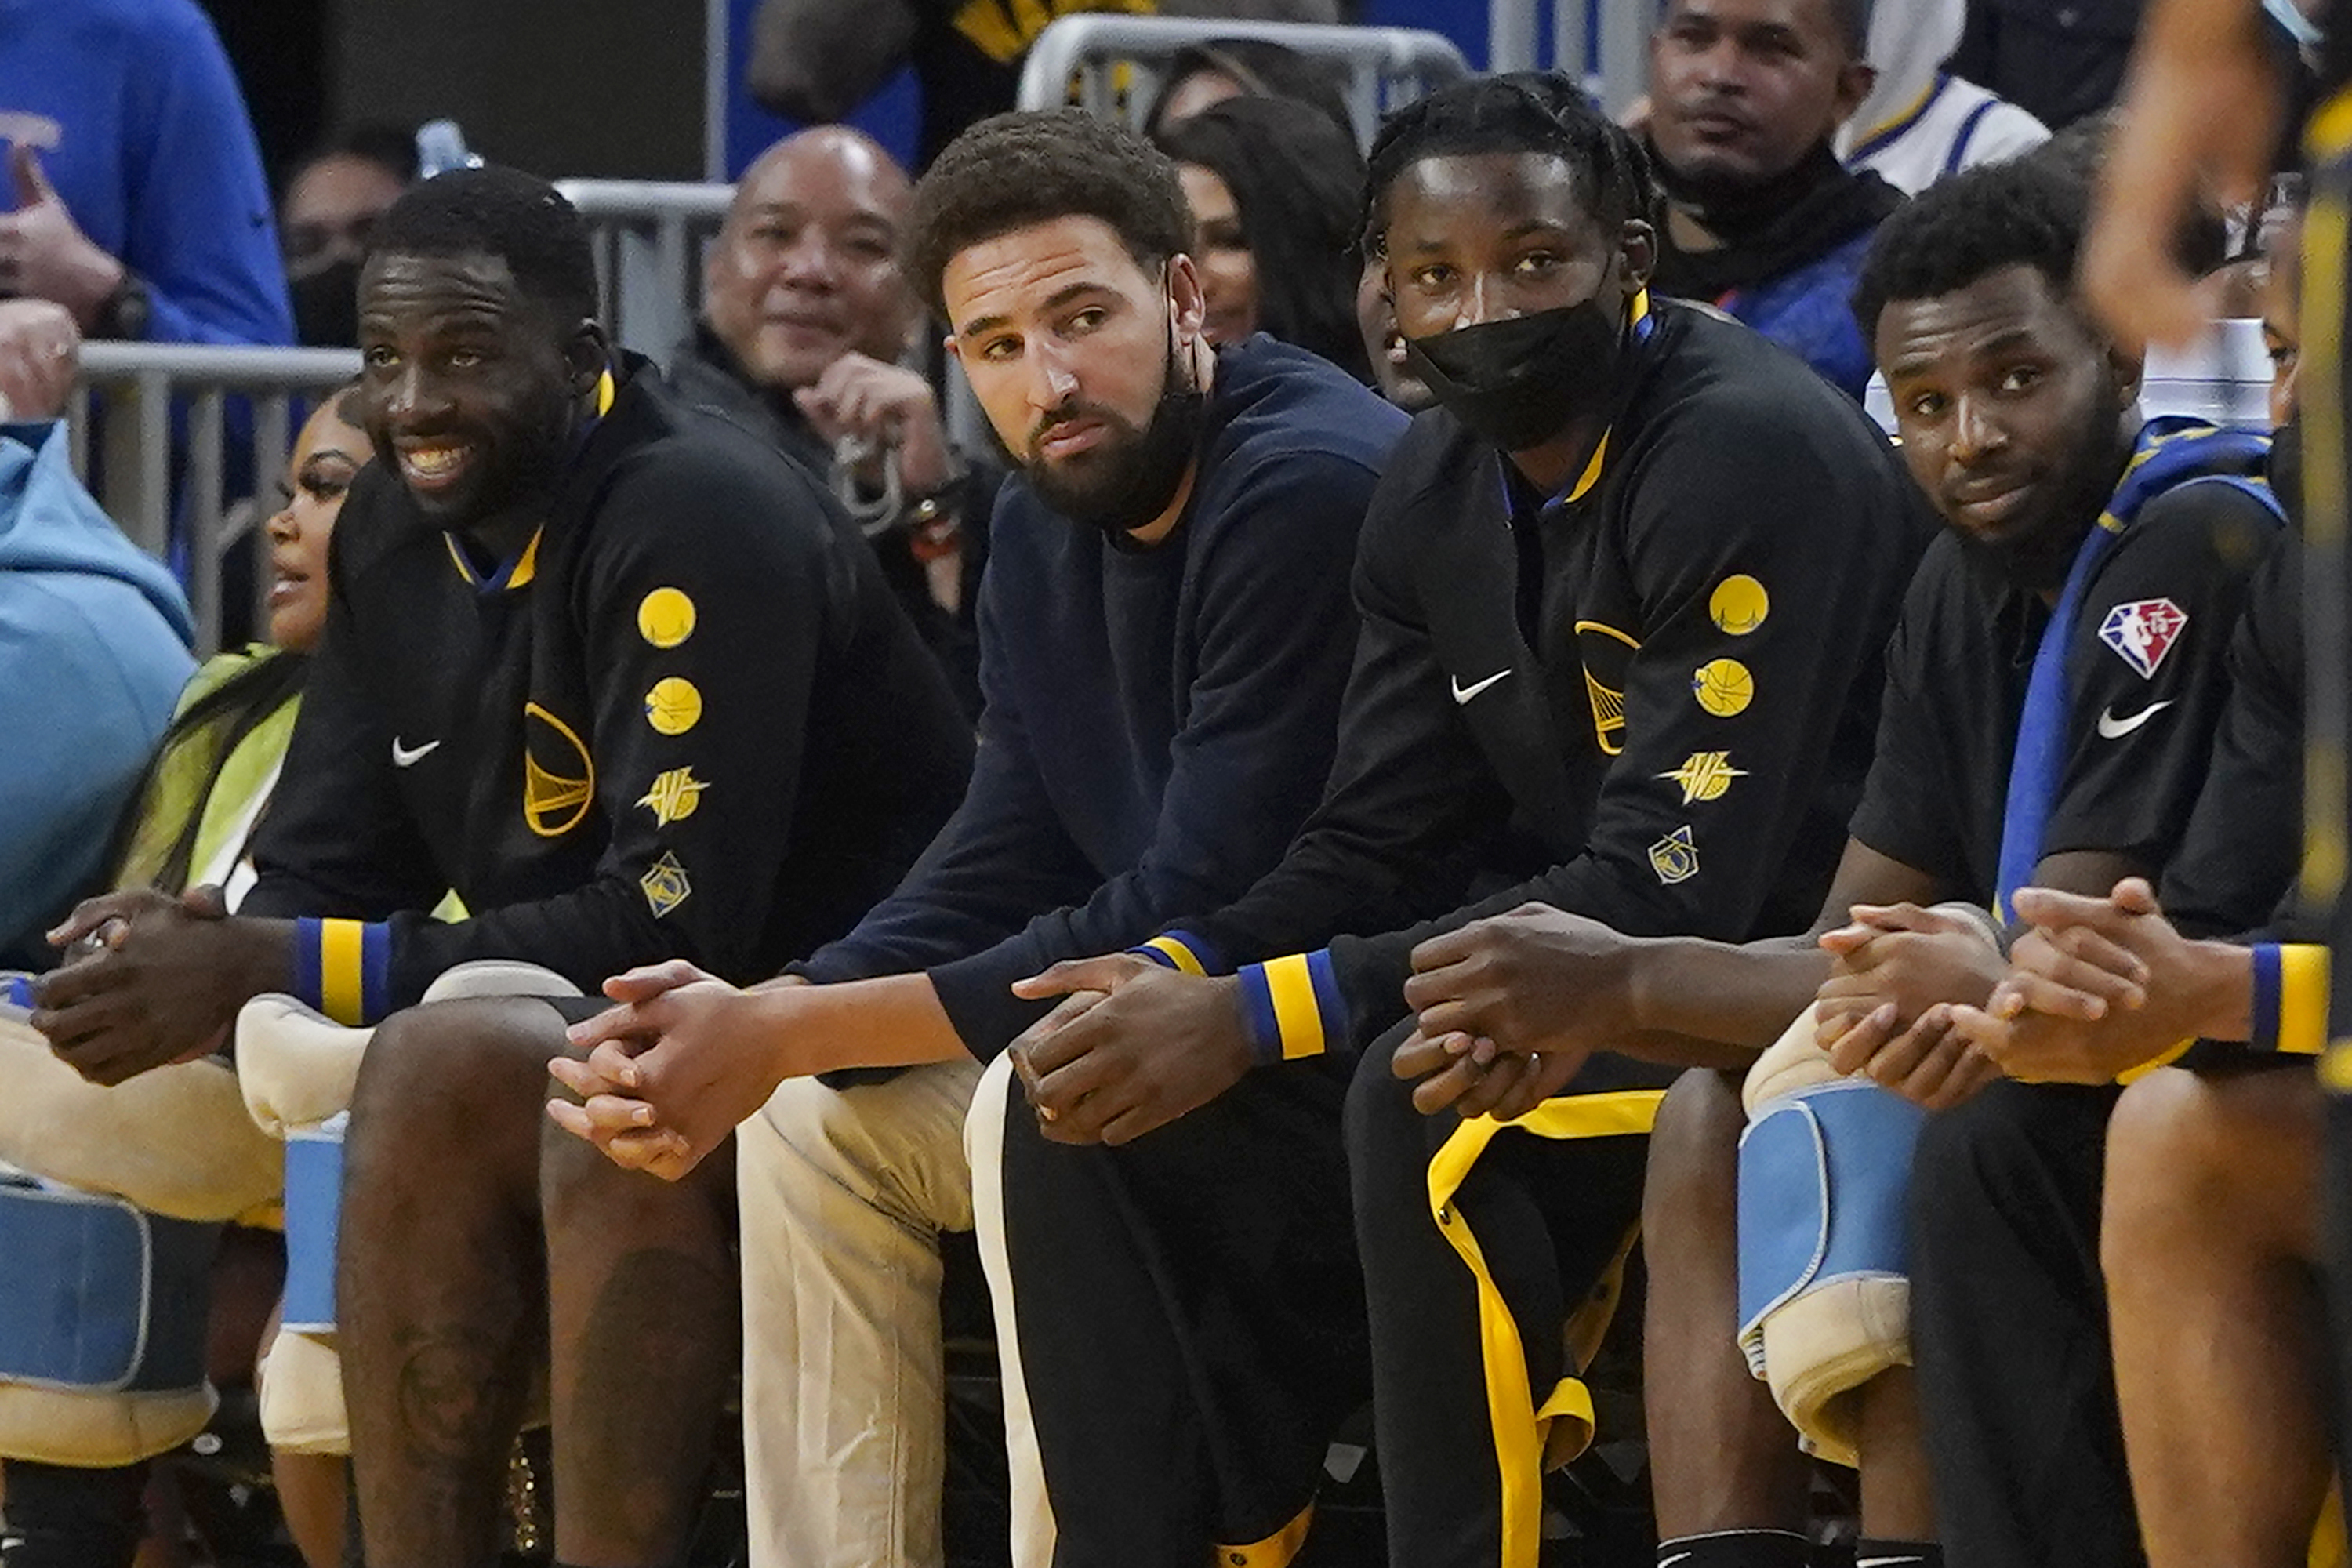 Waiting for Warriors' opener is like waiting for Christmas Day